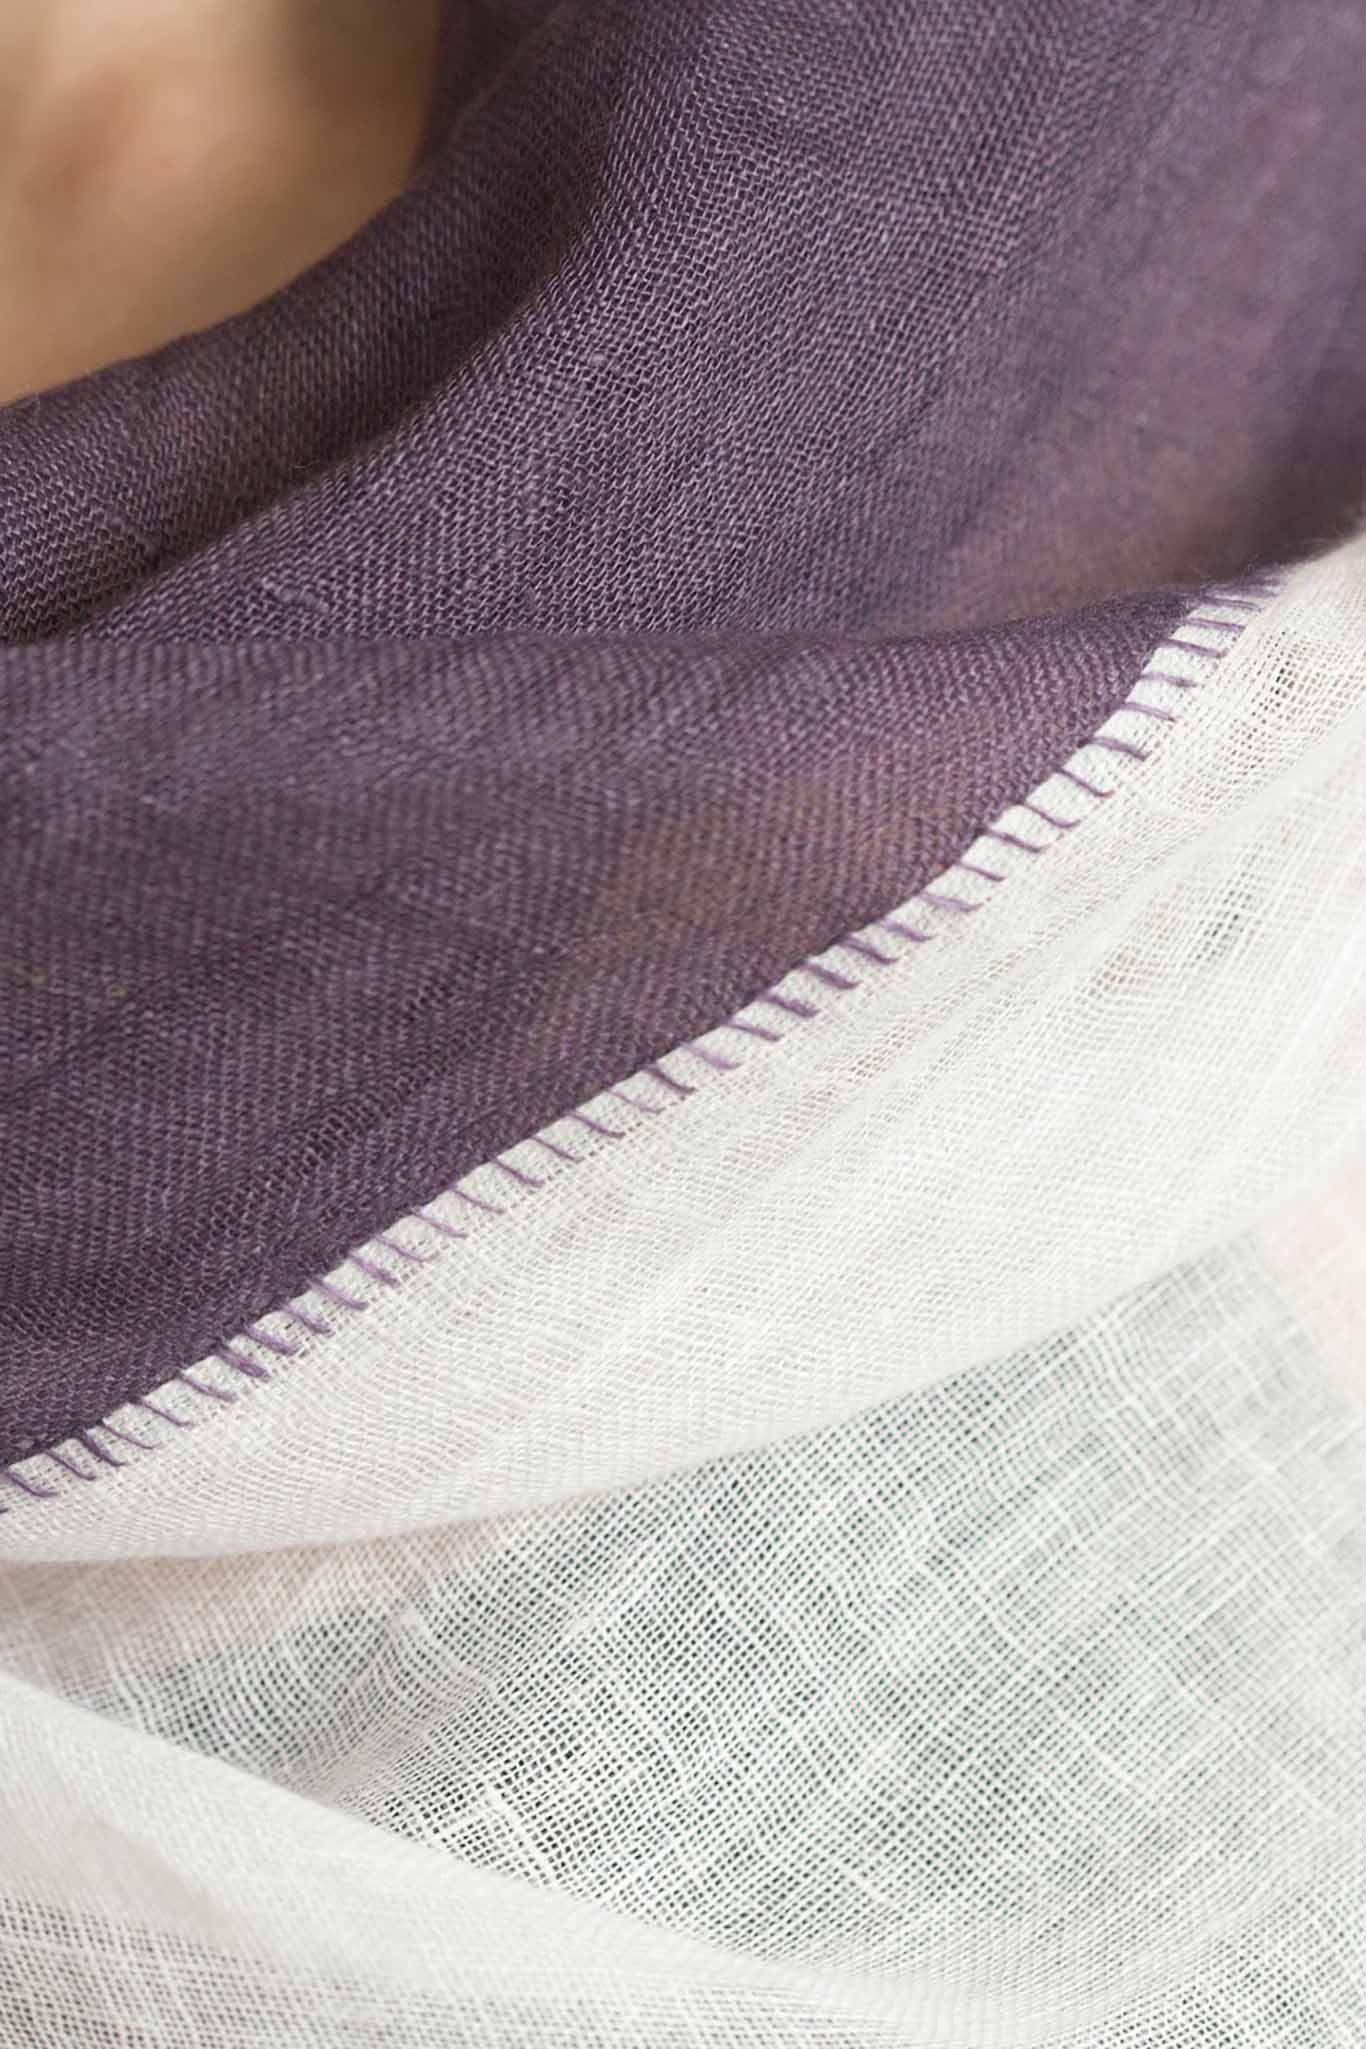 From the Road Vari Scarf - Mulberry/Lilac